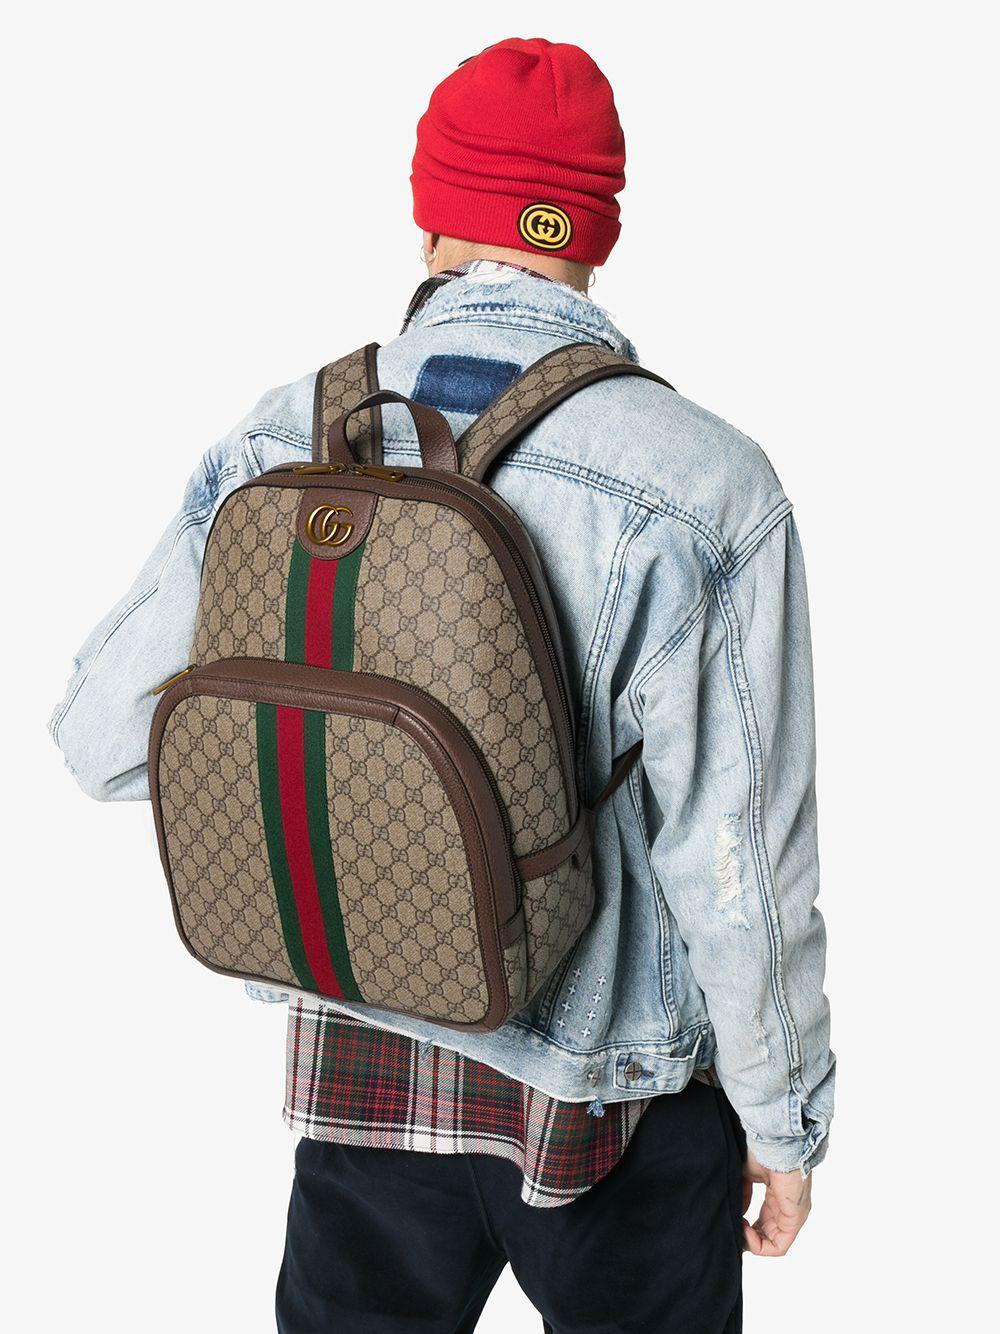 gucci ophidia gg backpack